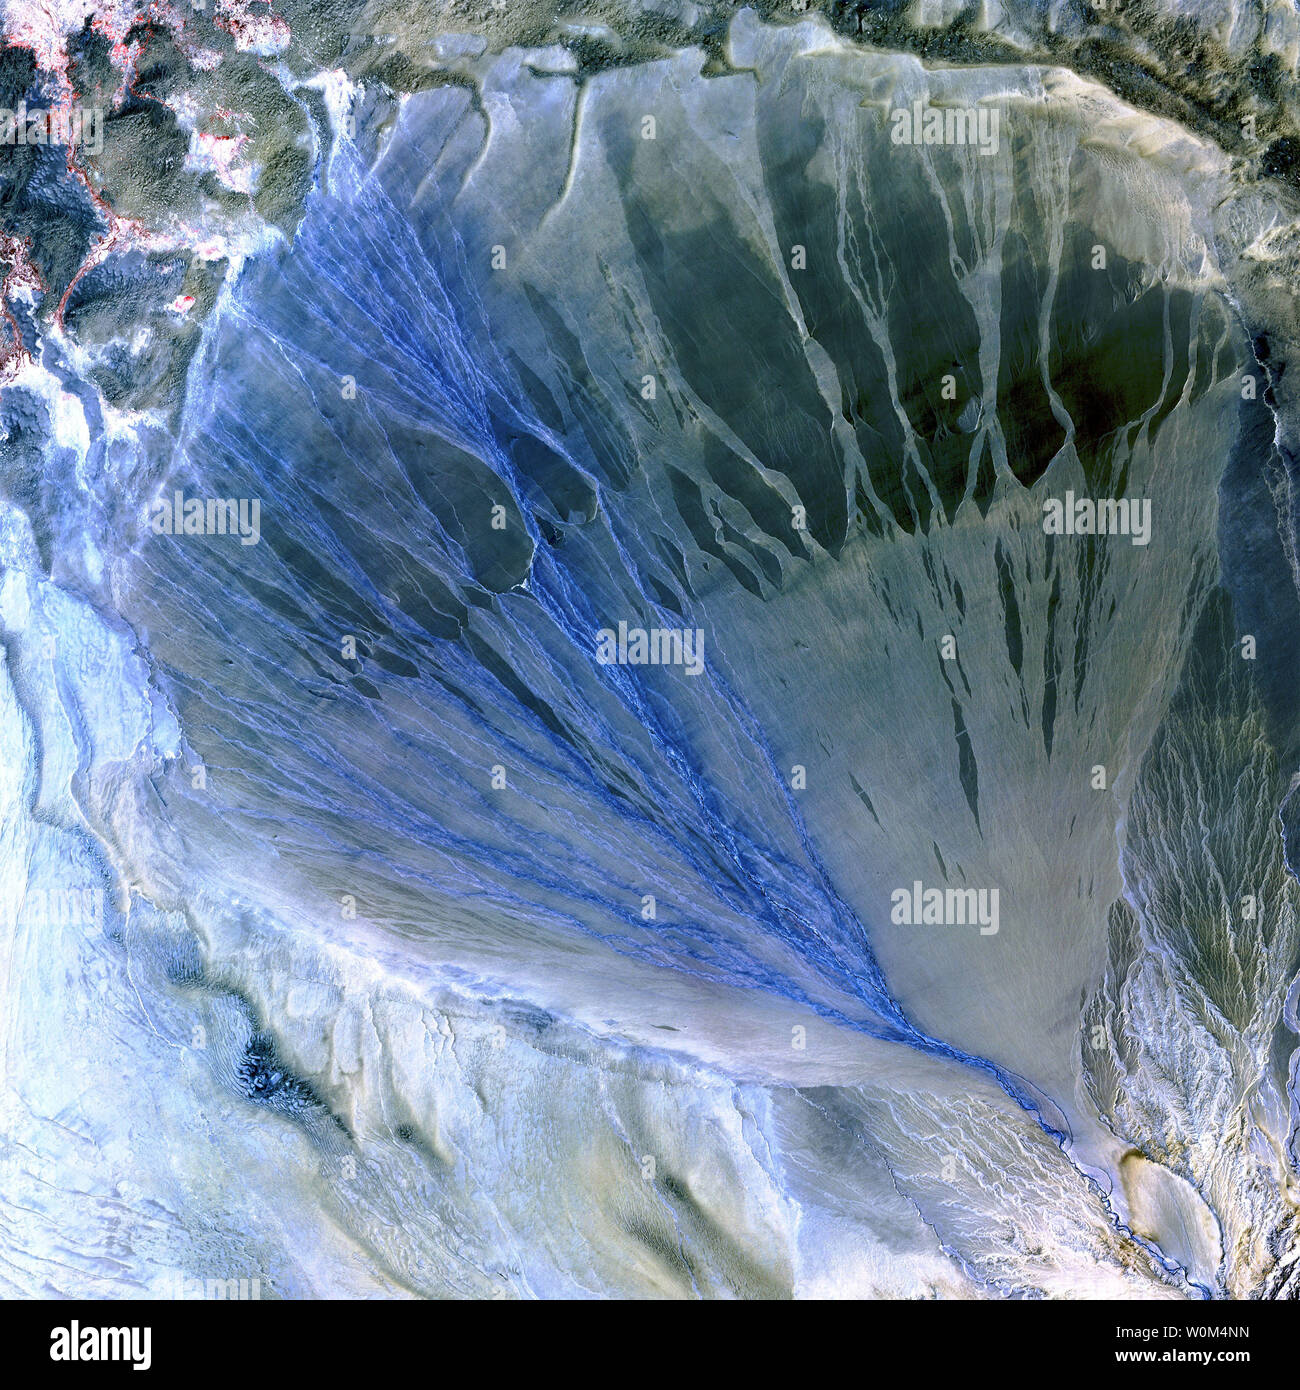 A vast alluvial fan blossoms across the desolate landscape between the Kunlun and Altun Mountains that form the southern border of the Taklimakan Desert in China’s XinJiang Province. The river appears electric blue as it runs out of the mountains at the bottom right corner of the scene and then fans out into scores of intricate, braided channels that disappear into the desert. Dry channels—the river’s former paths?—appear as silvery etchings at lower right. This scene was acquired by the ASTER instrument on NASA’s Terra satellite on May 2, 2002.   (UPI Photo/NASA) Stock Photo